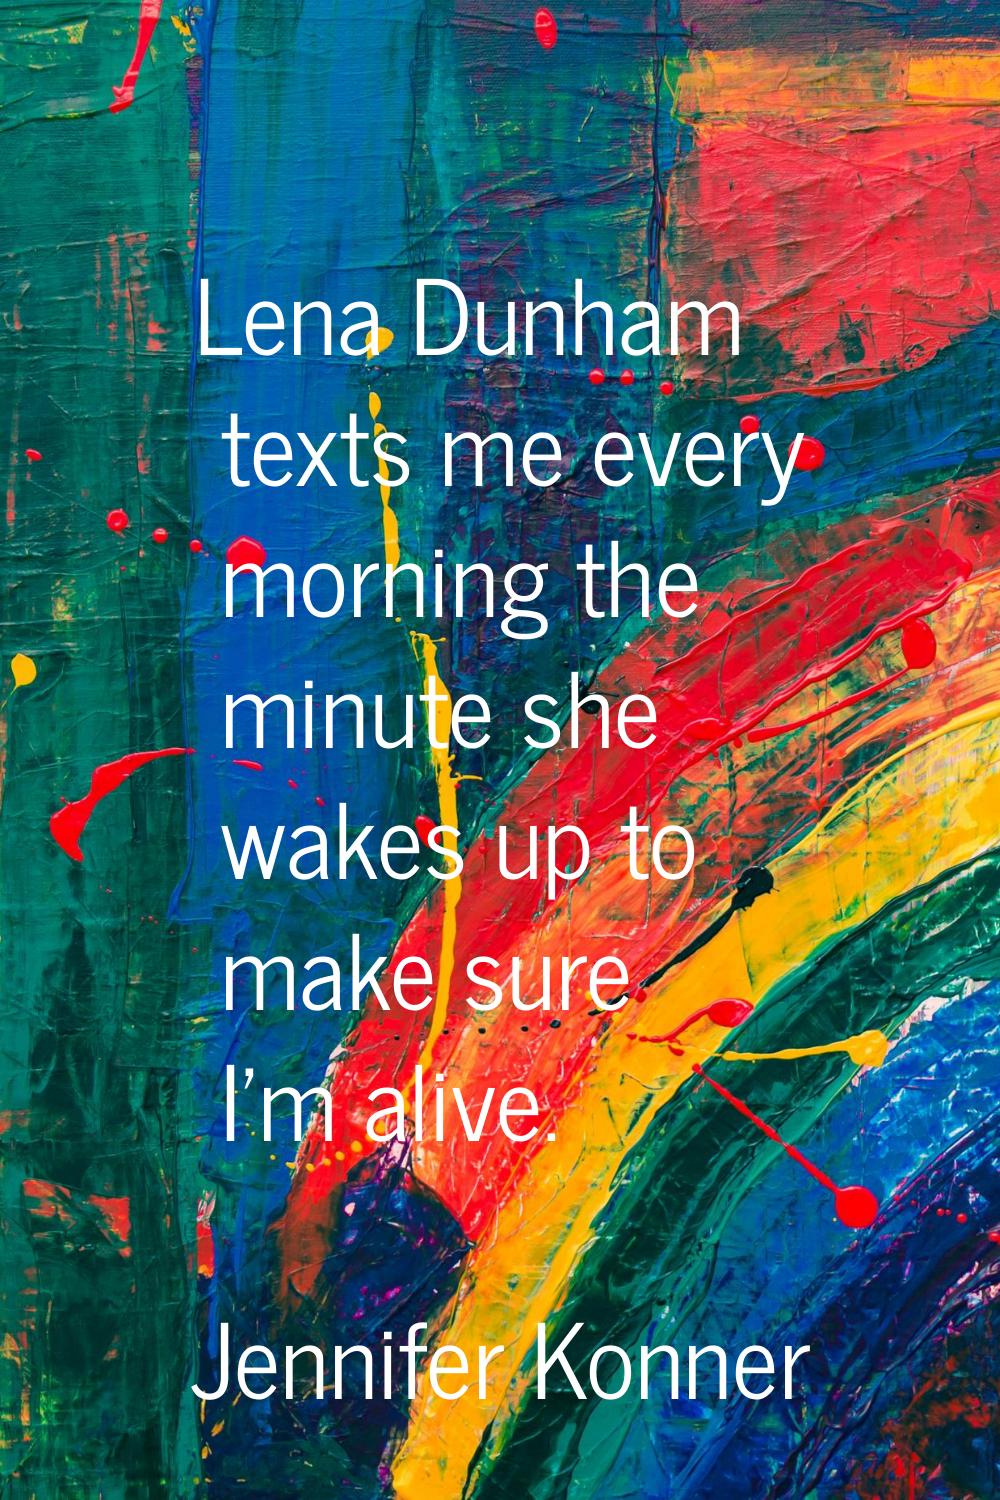 Lena Dunham texts me every morning the minute she wakes up to make sure I'm alive.